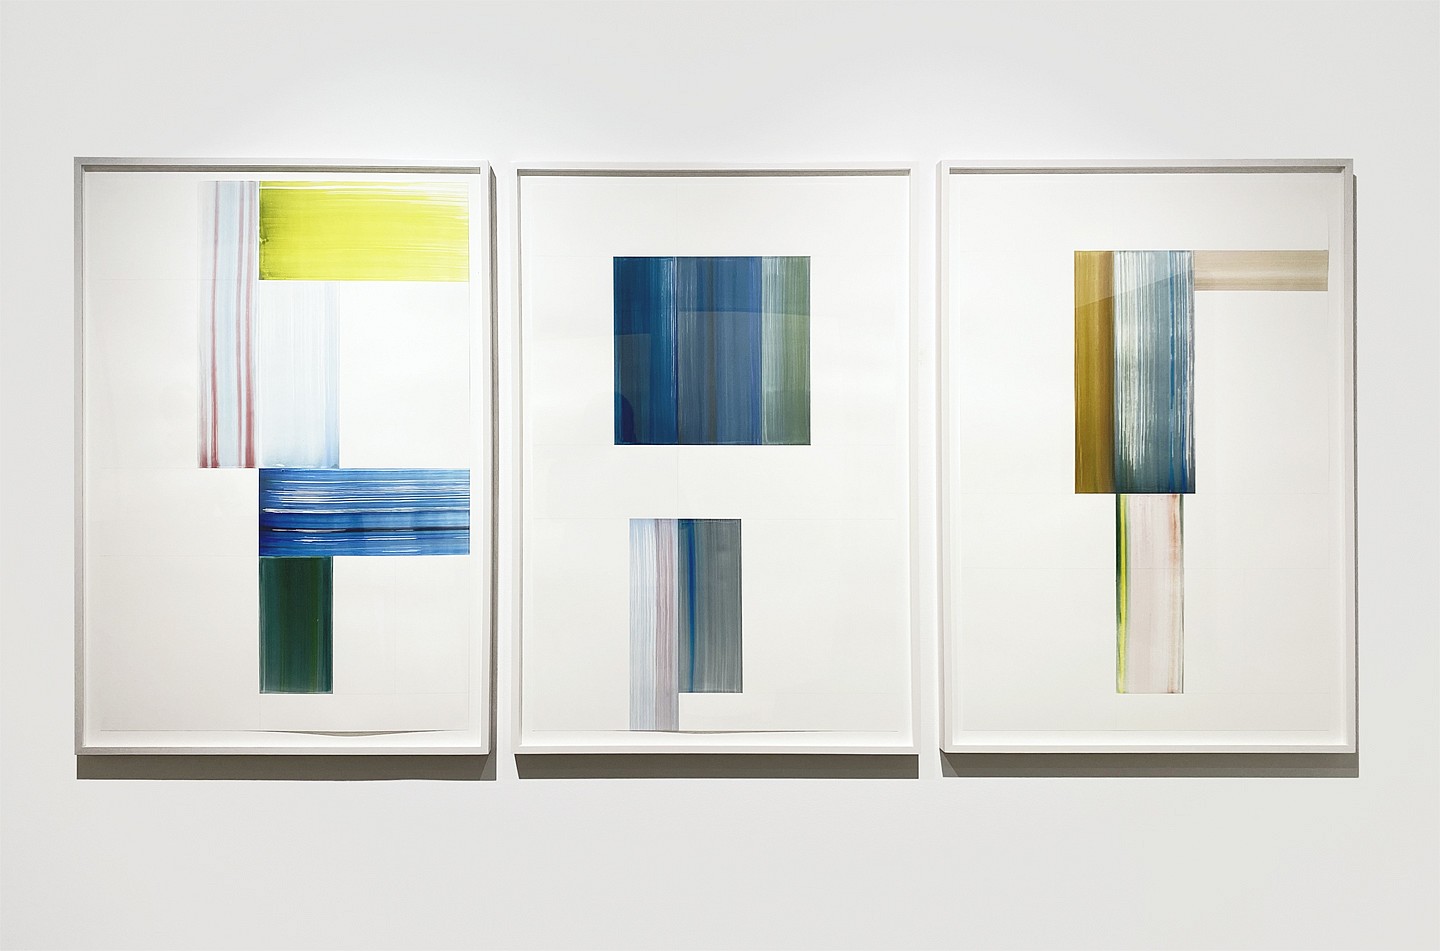 Agnes Barley
Constructed Strokes Installation, 2020
44 x 30 inch paper / 47 1/2 x 33 1/2 inch frames / 47 1/2 x 104 1/2 inch group